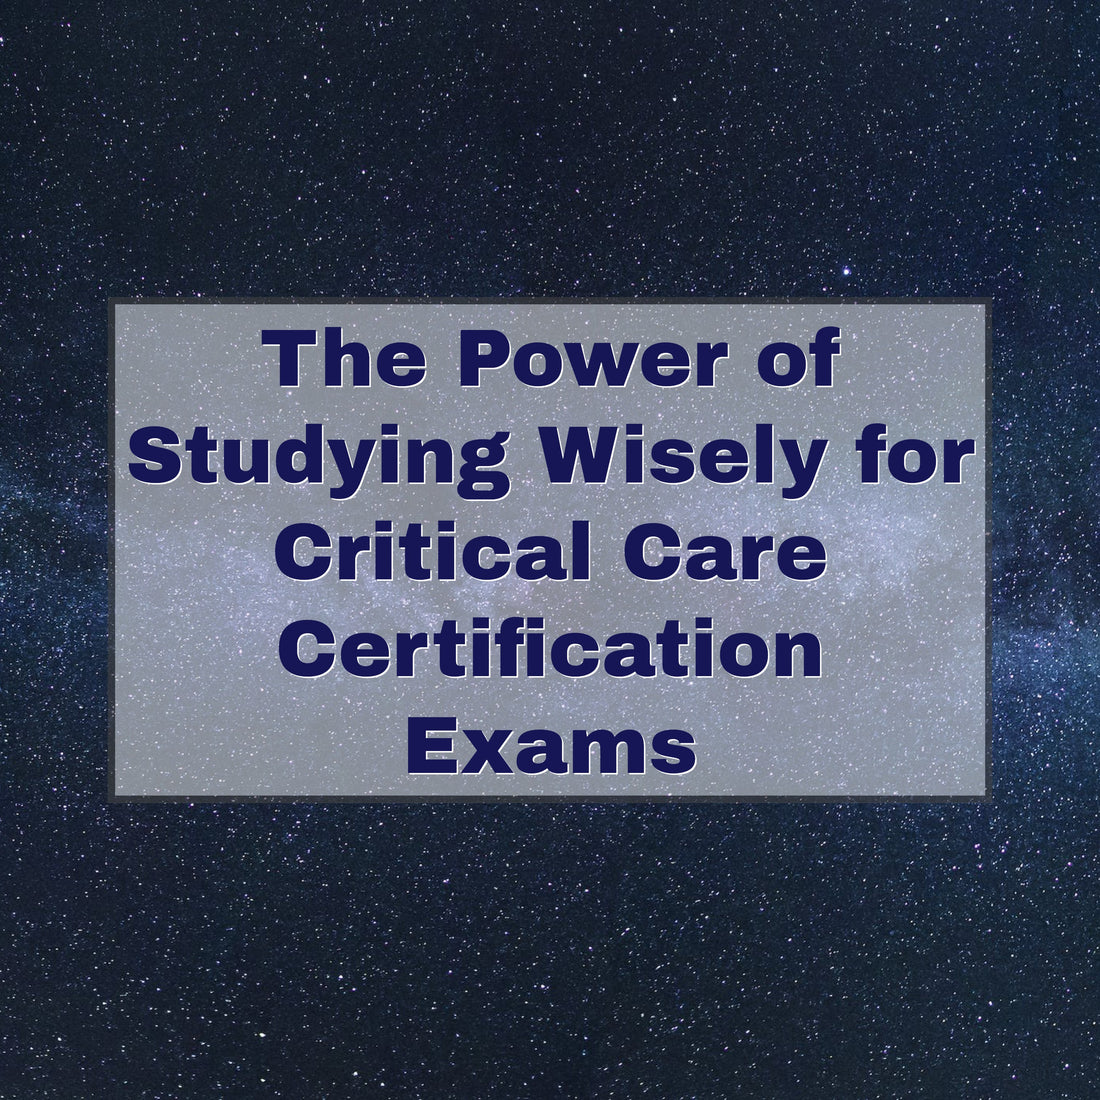 The Power of Studying Wisely for Critical Care Certification Exams